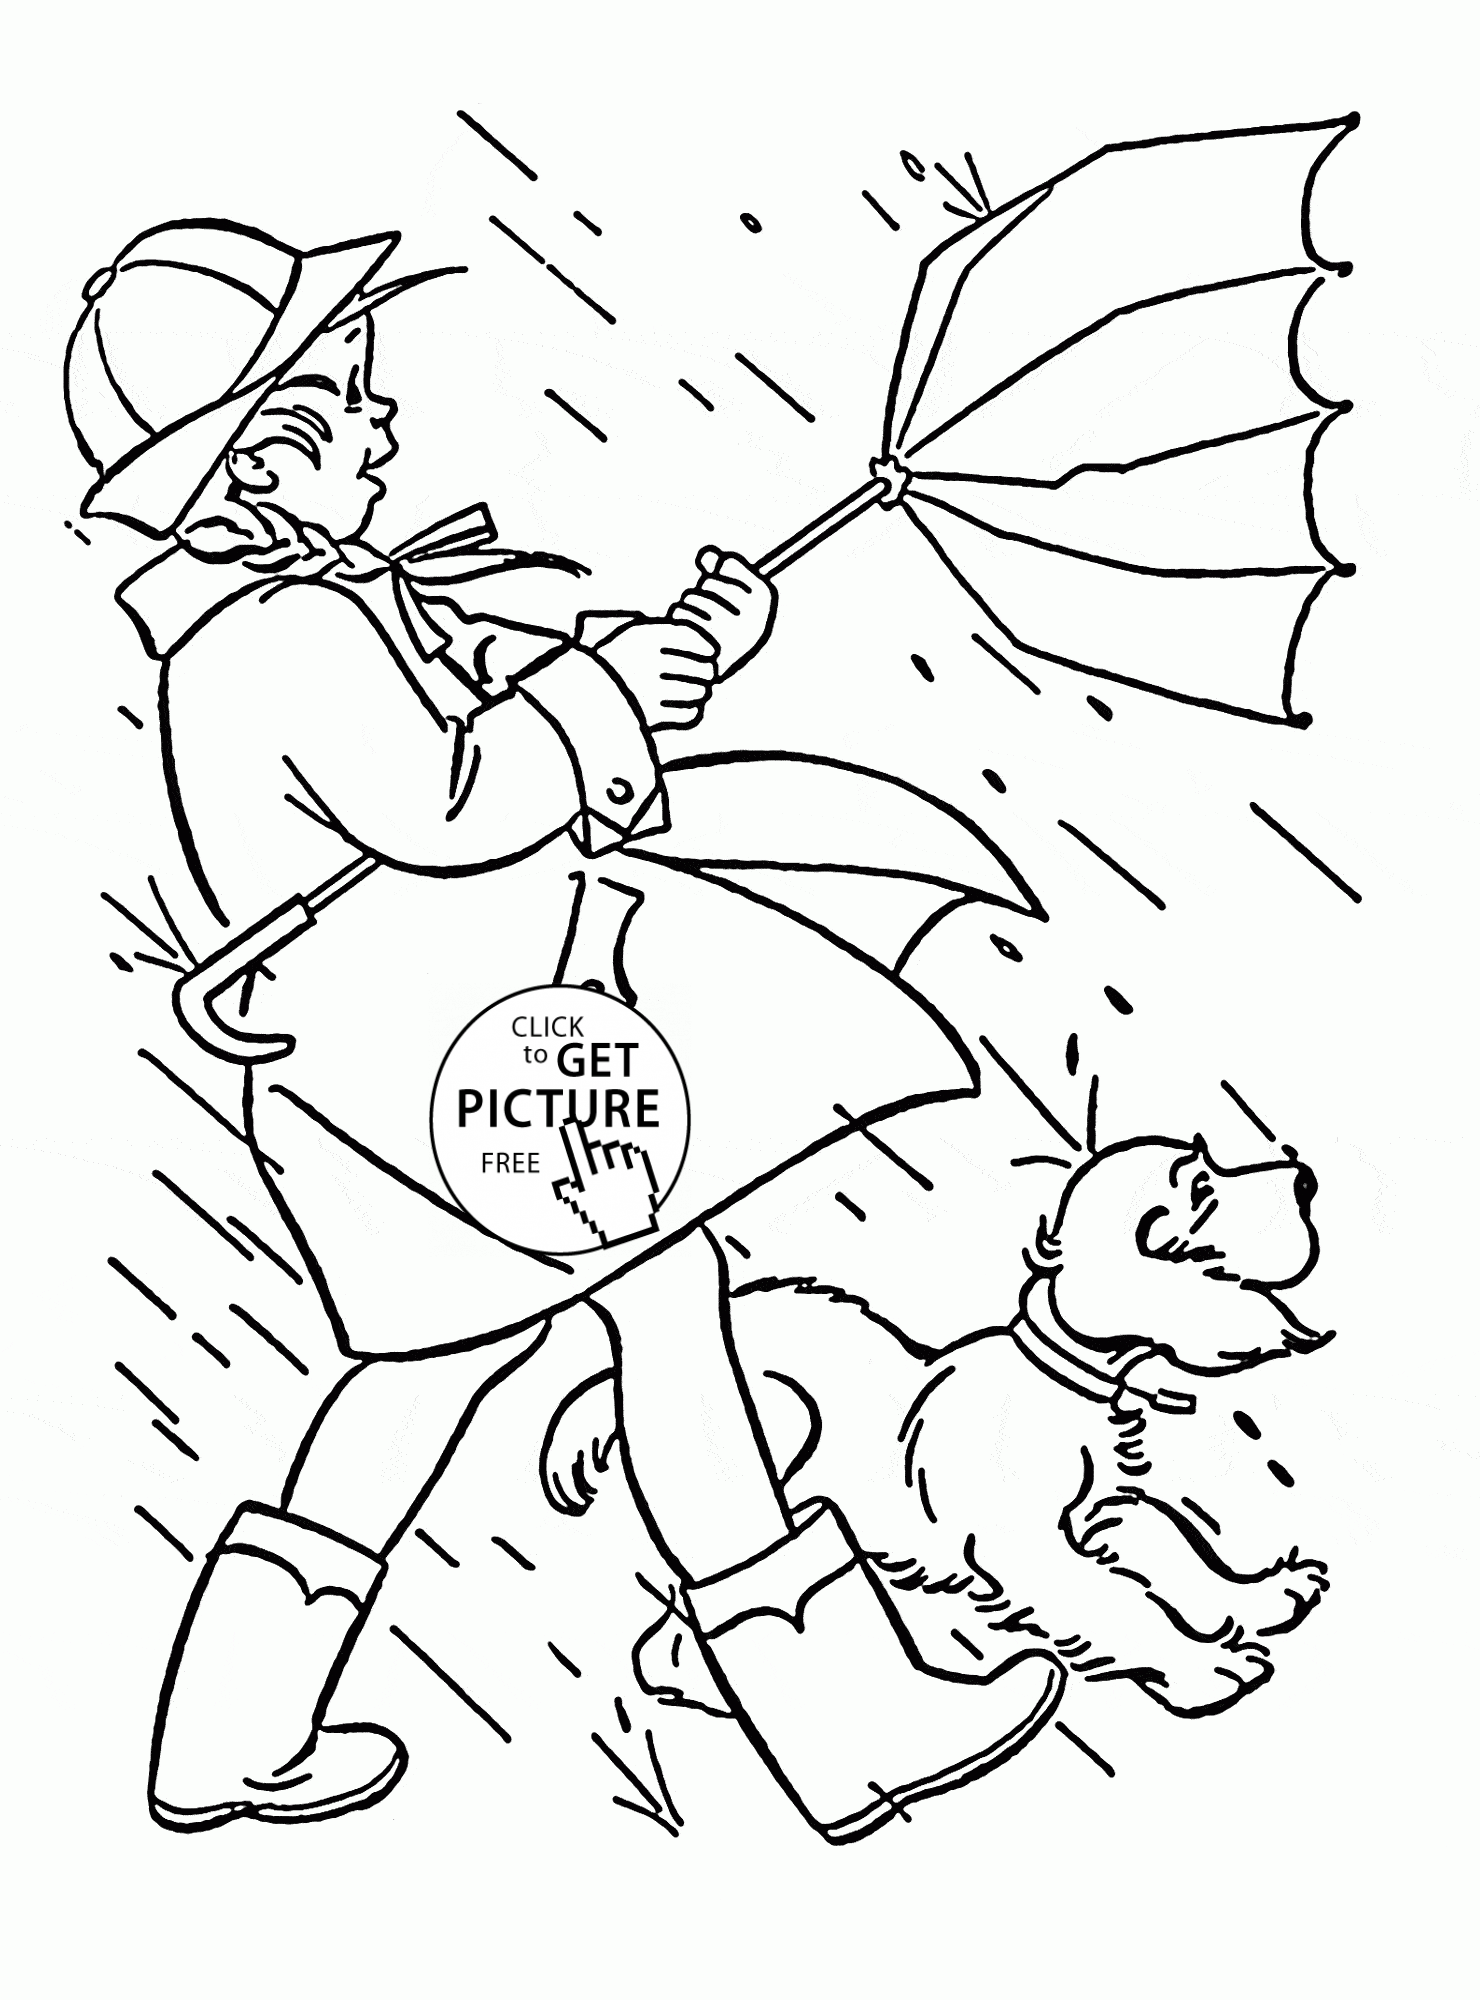 Windy and Rainy Spring coloring page for kids, seasons coloring pages  printables free - Wuppsy.com | Spring coloring sheets, Fall coloring pages, Coloring  pages